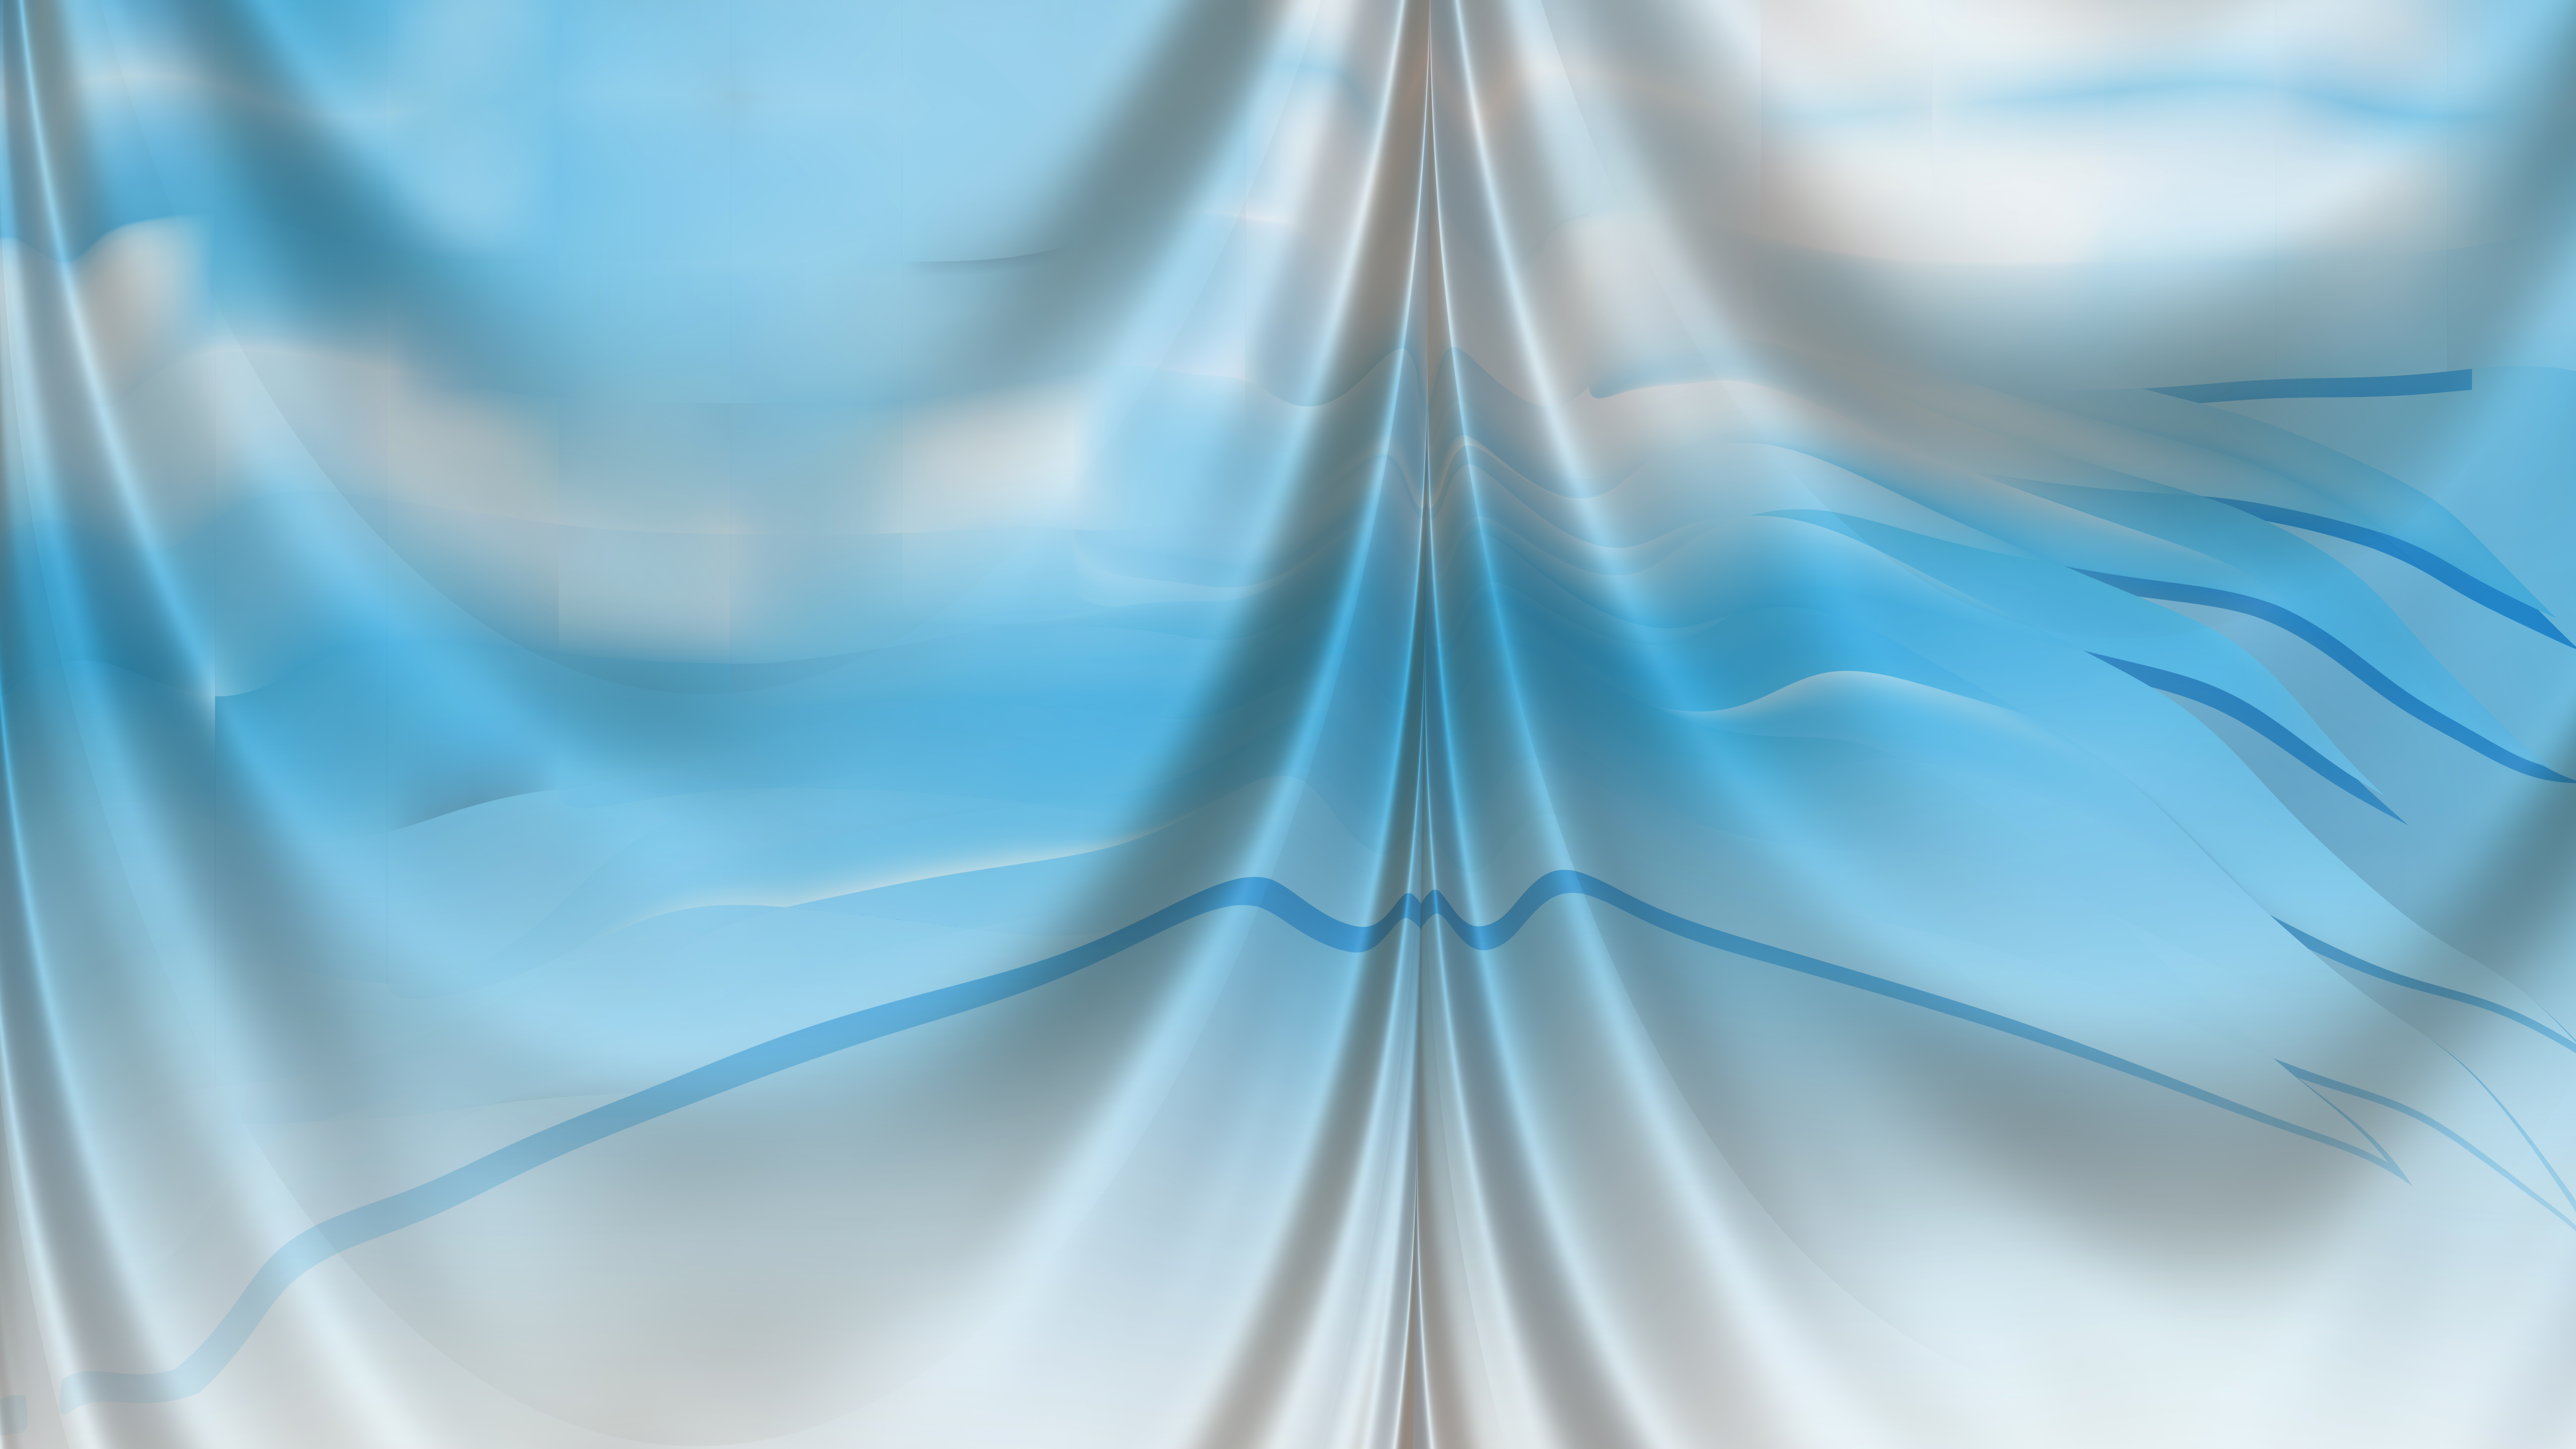 Abstract Light Blue Texture Background